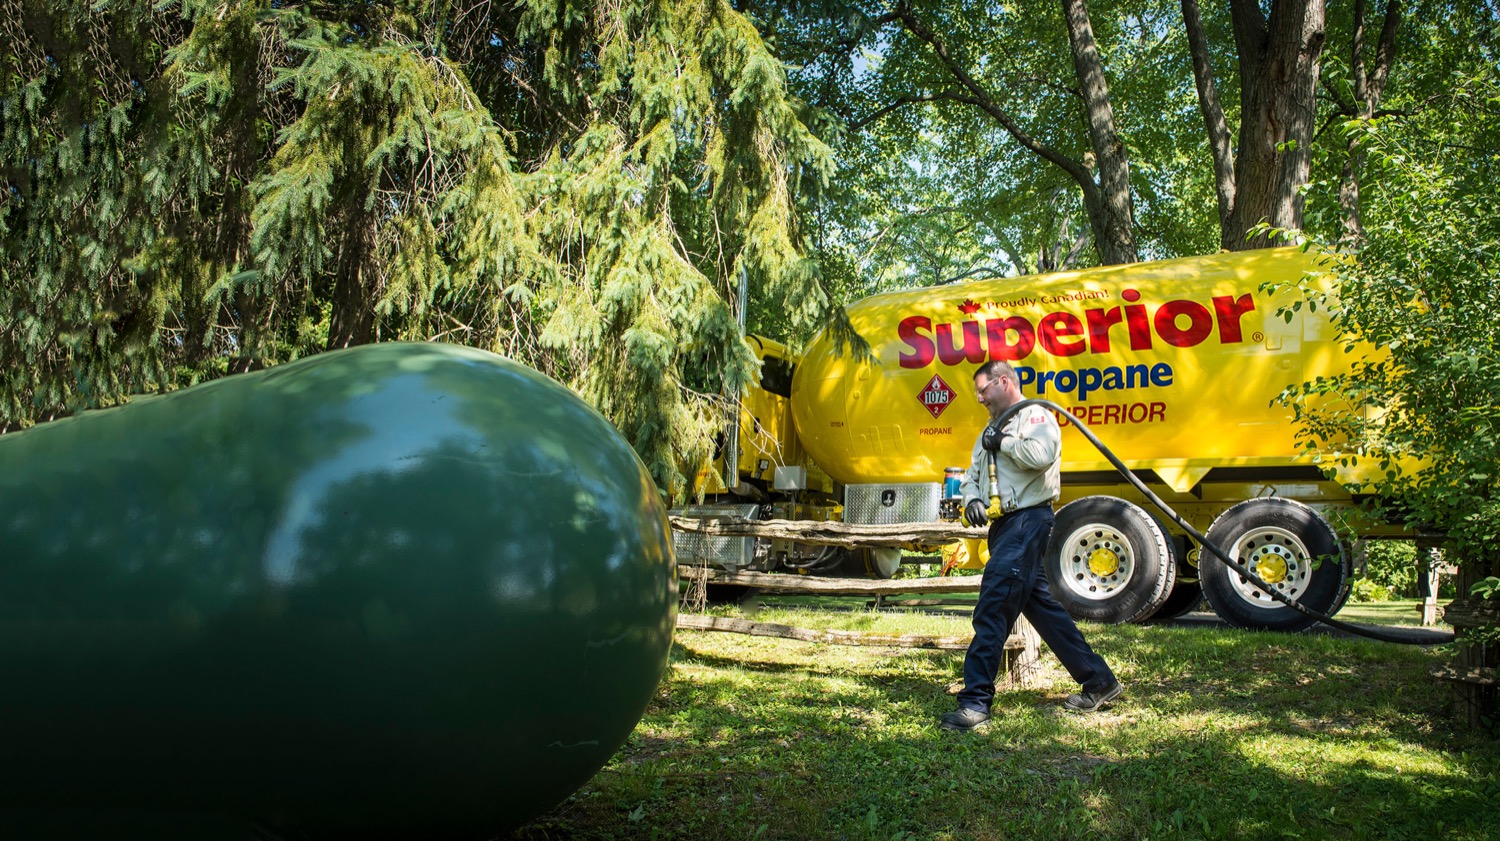 Superior Propane employee preparing to refill a green propane tank in a forested area. 